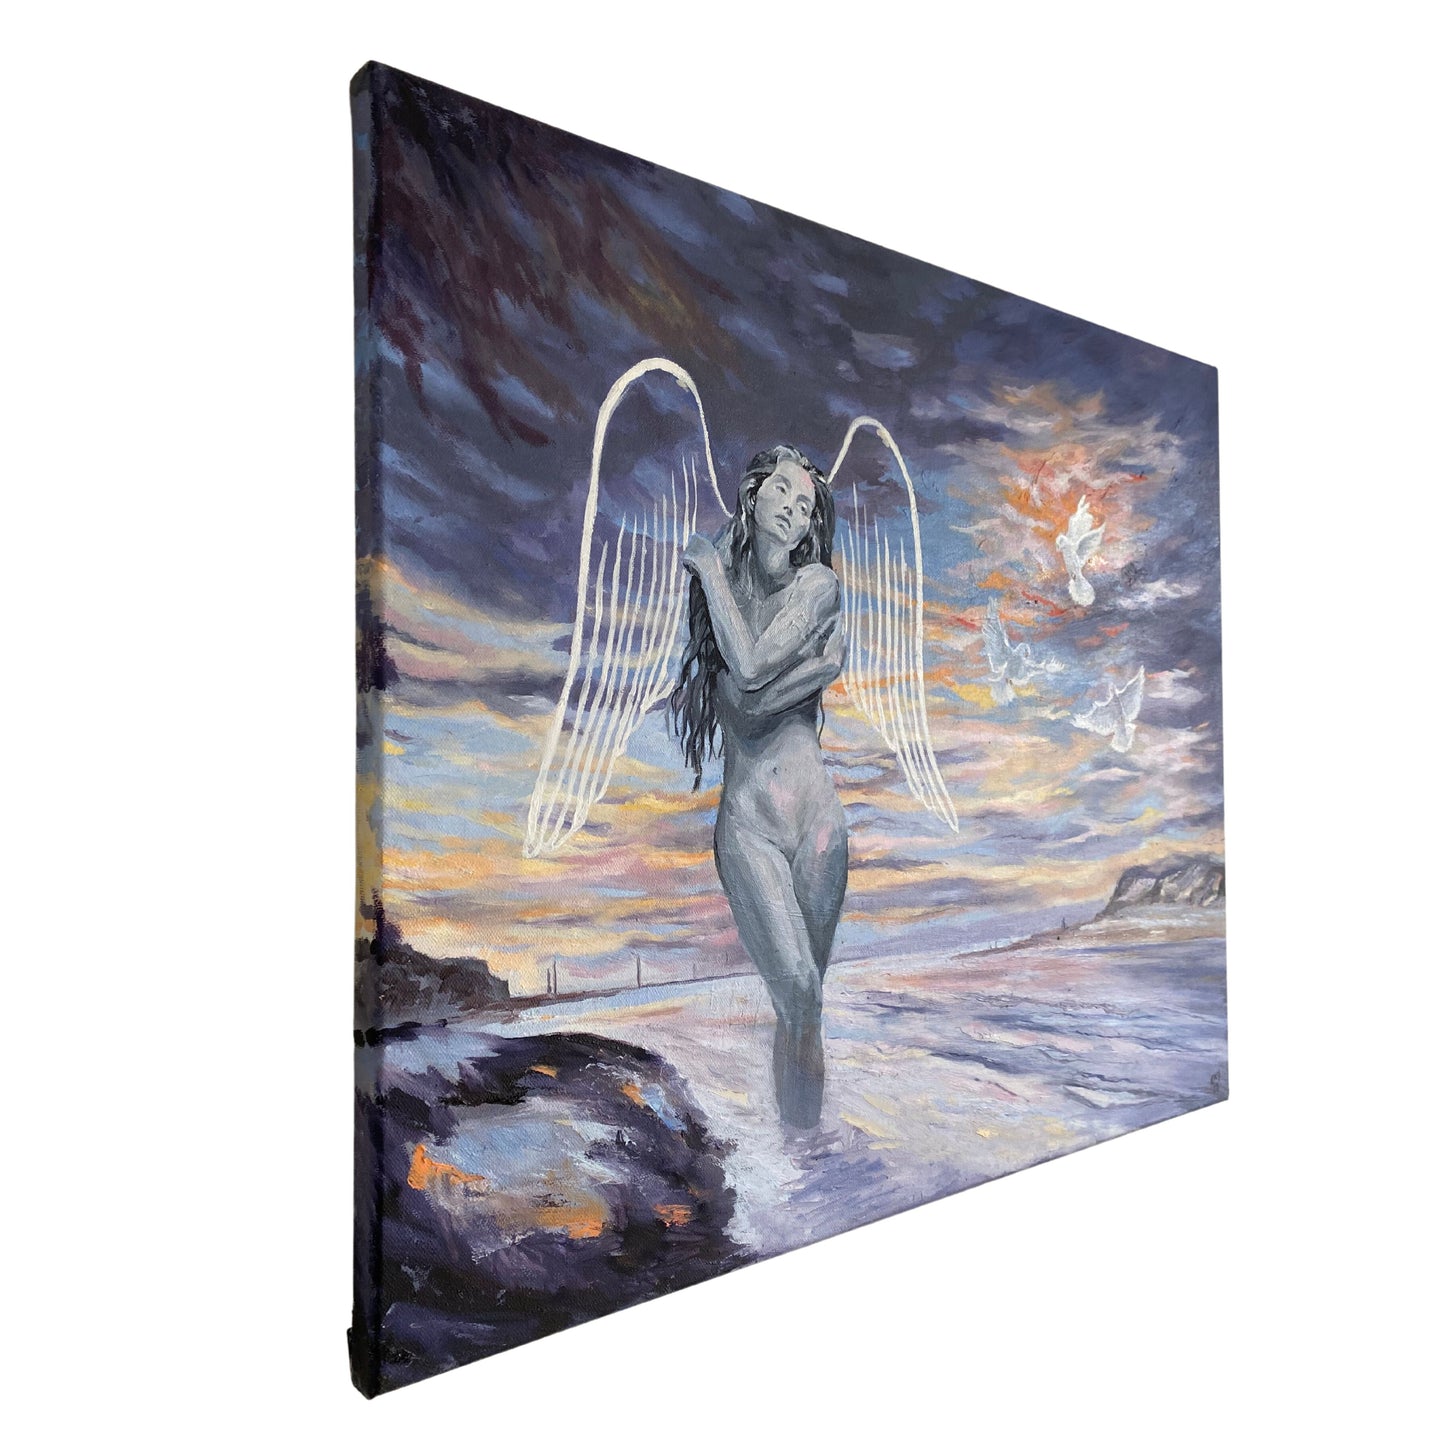 Angelic Angel with doves side view - Original Oil Painting - lorrainefield